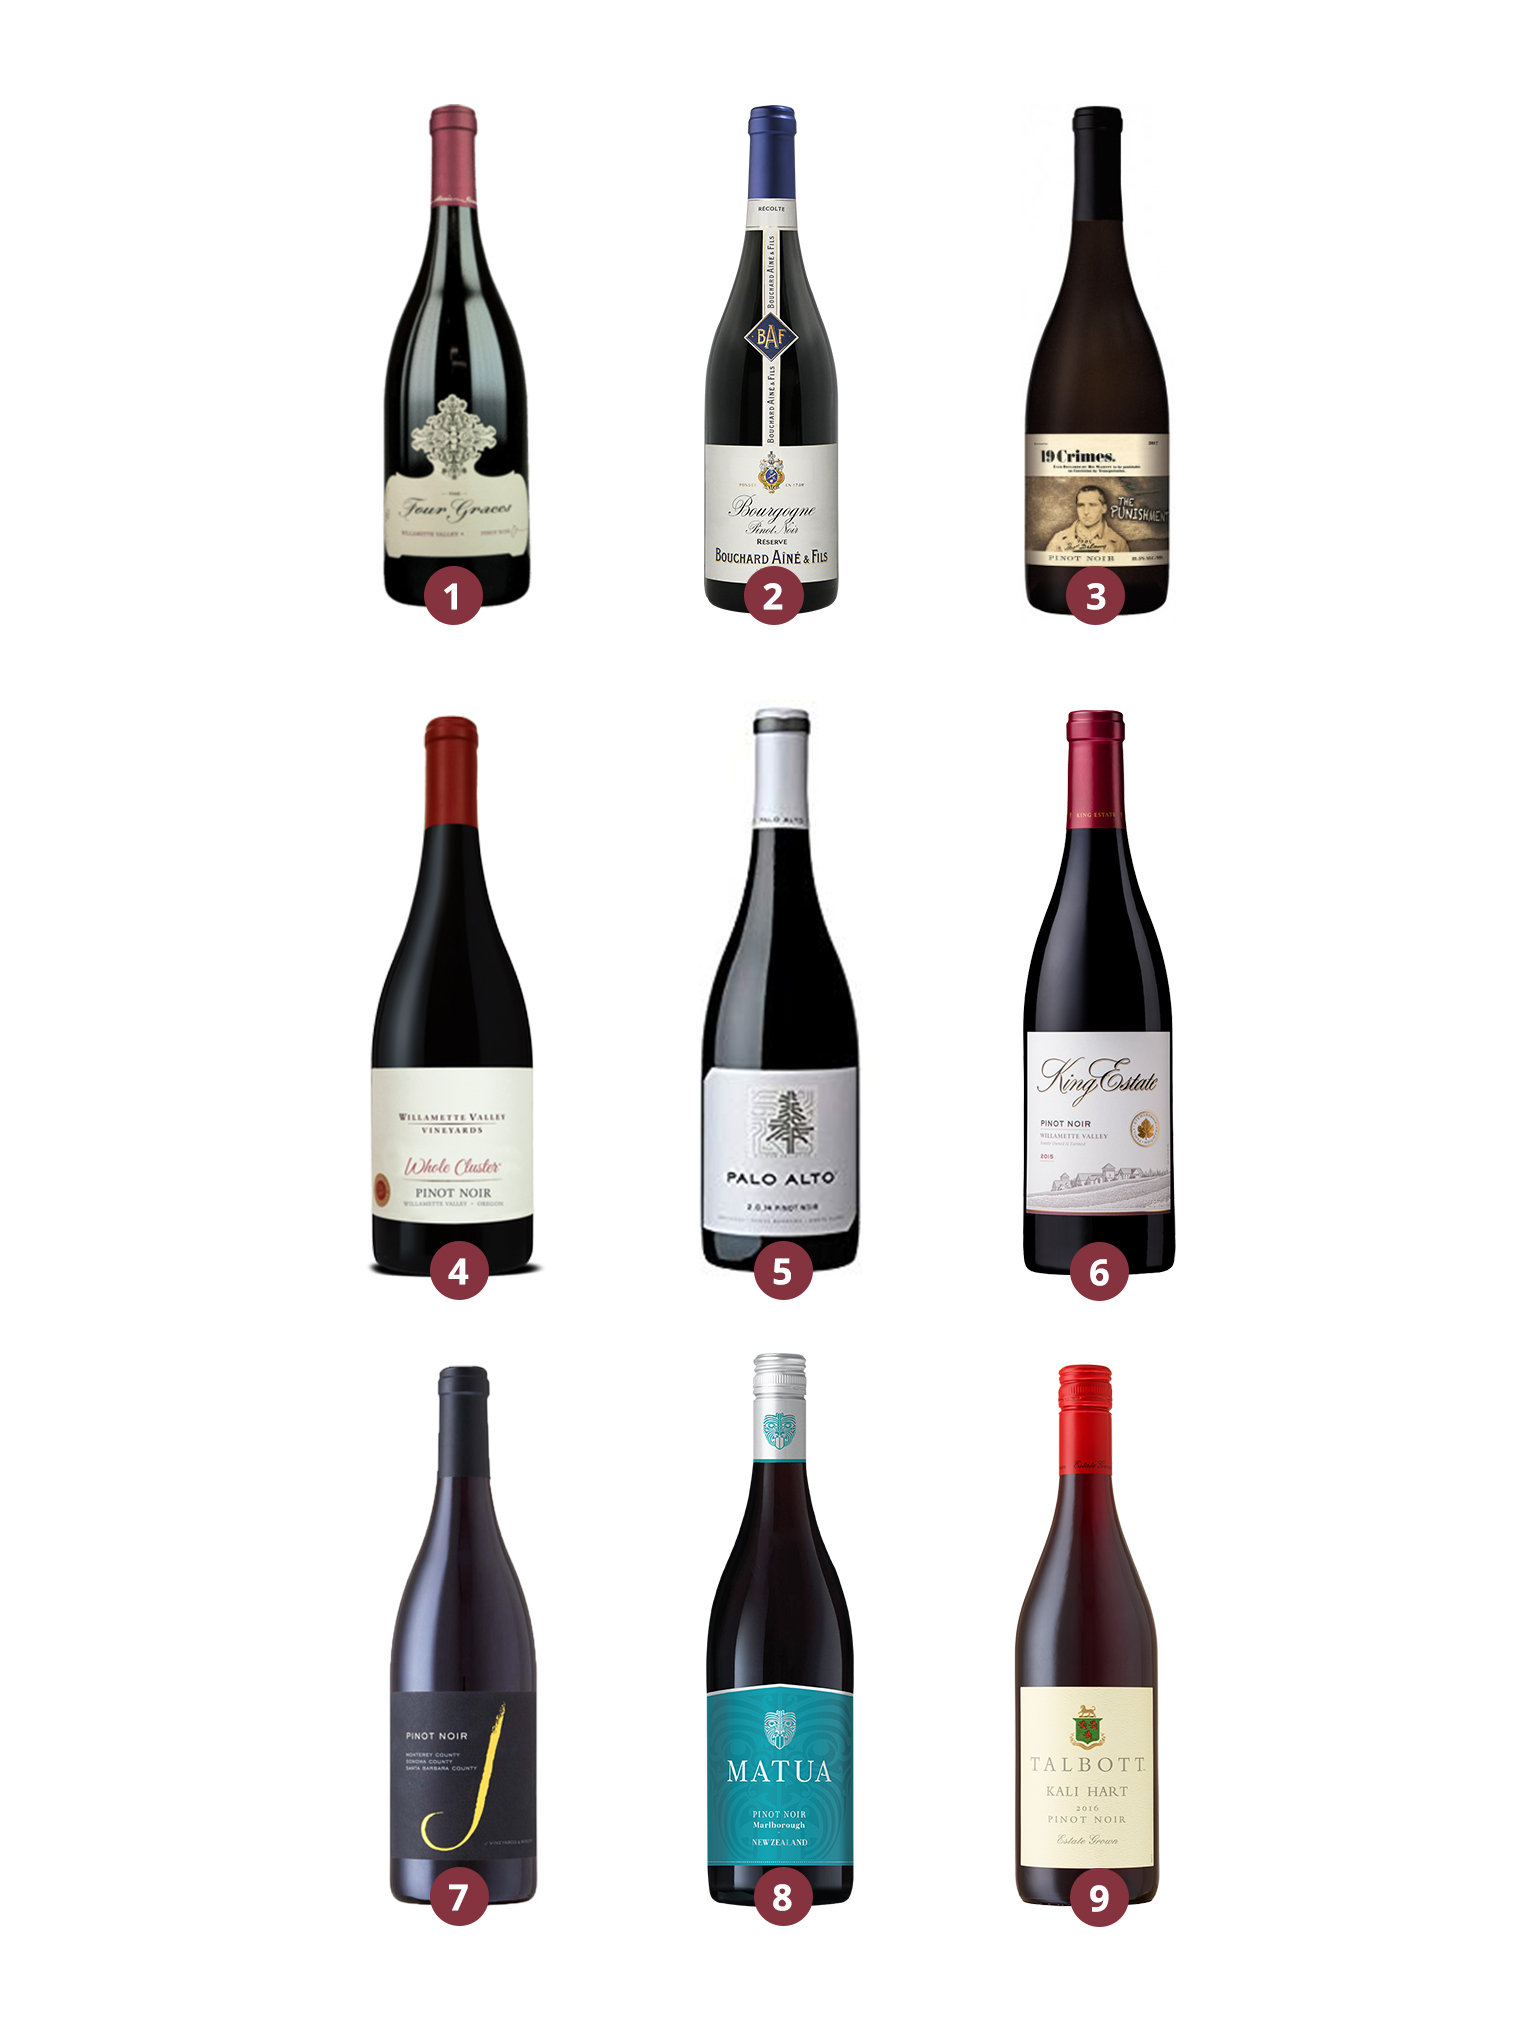 Ambassade Låse At læse Top-Selling Price Point: $15-$20 Pinot Noirs and Cabernet Sauvignons -  Breakthru Beverage Group